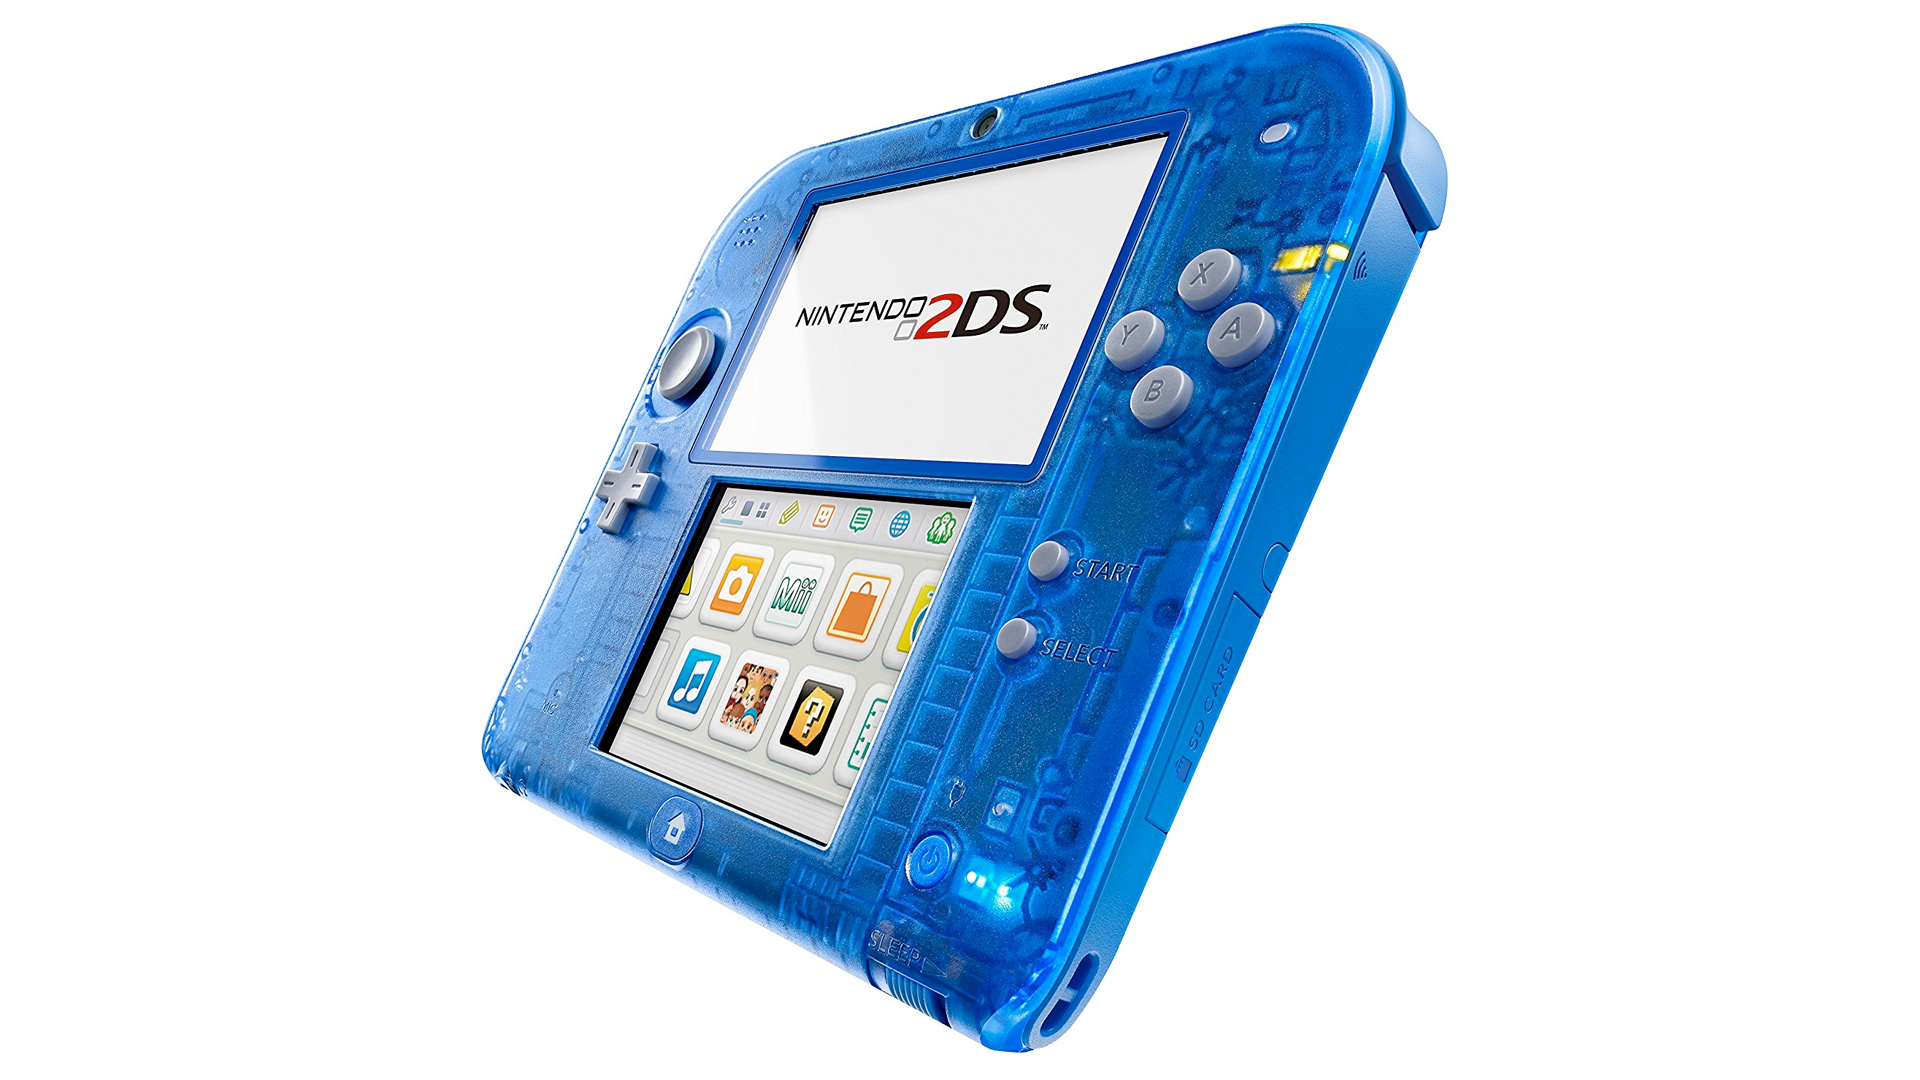 Promotional image of the Nintendo 2DS